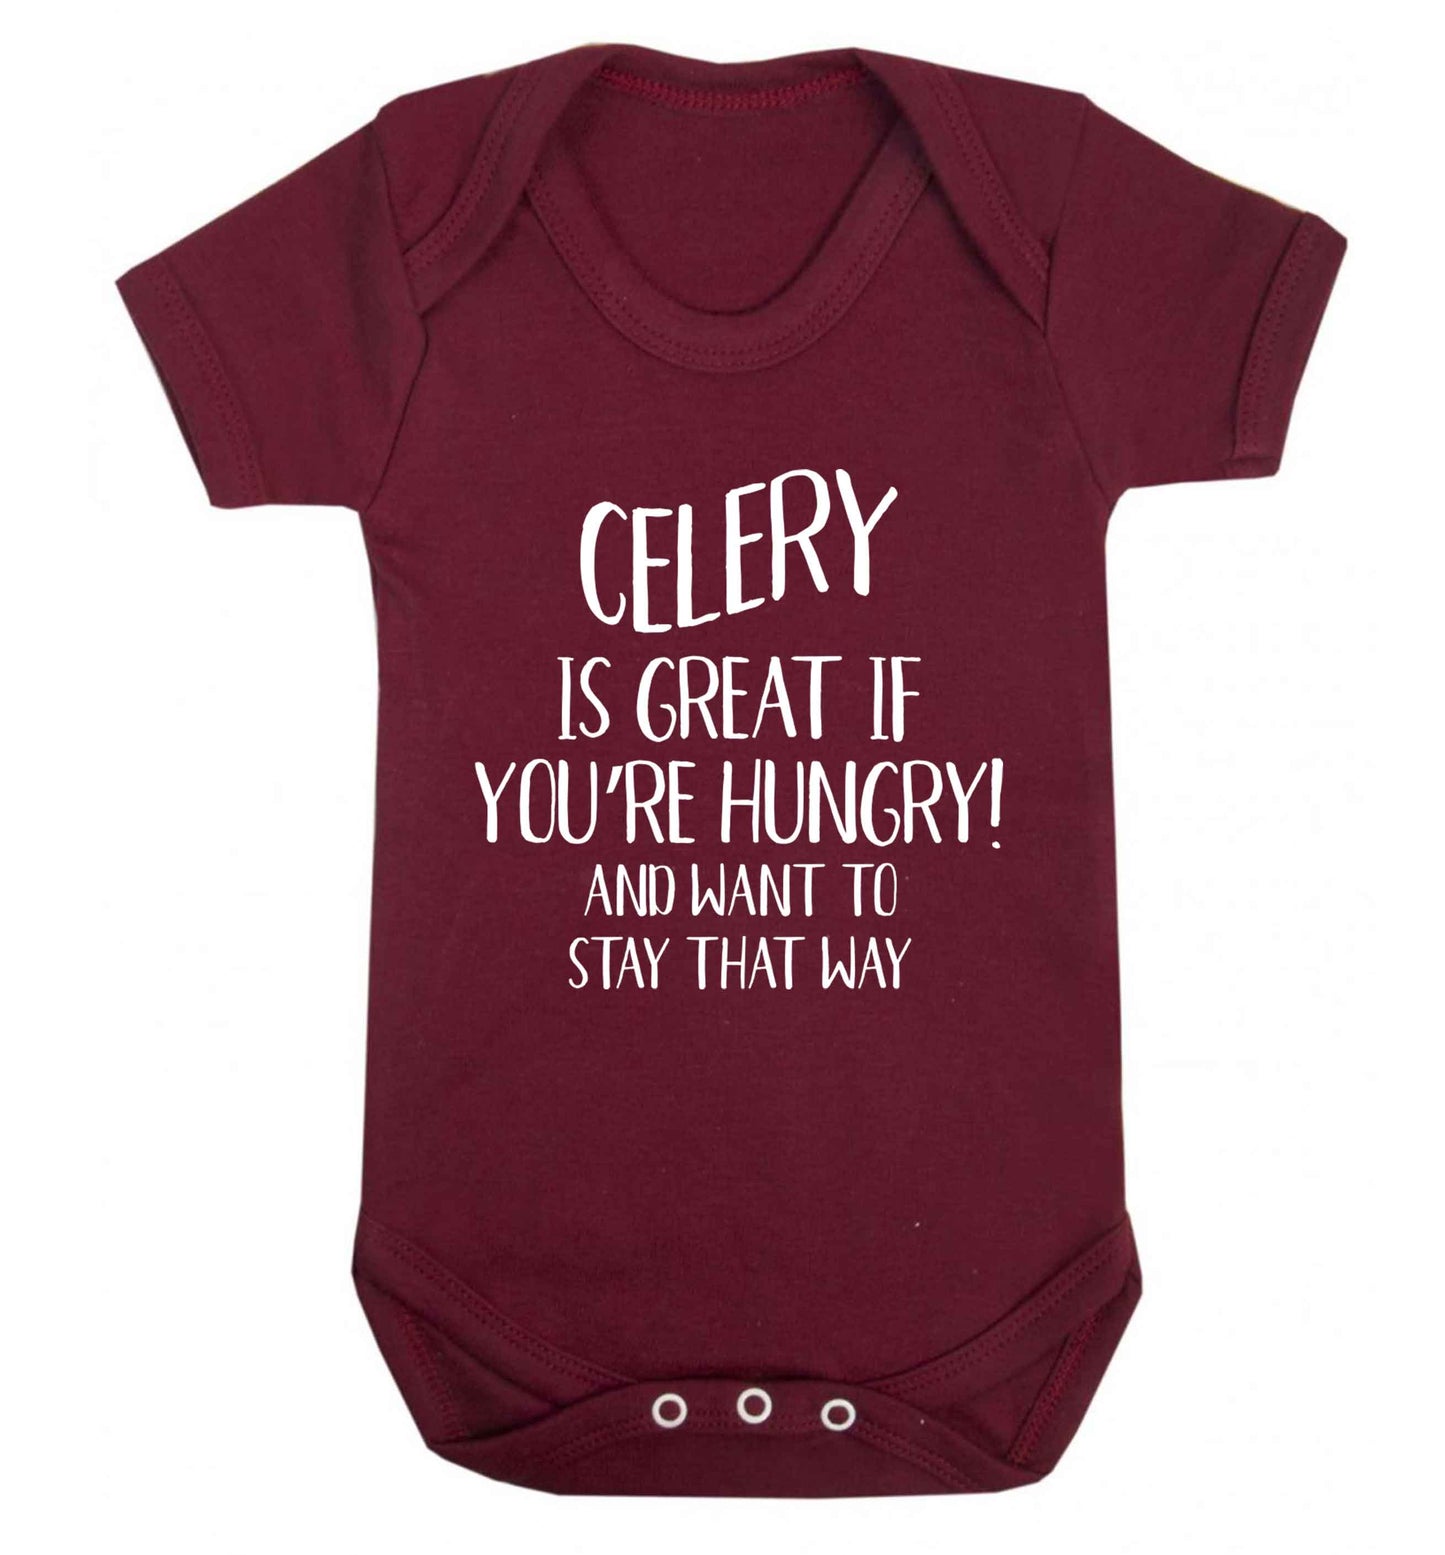 Cellery is great when you're hungry and want to stay that way Baby Vest maroon 18-24 months